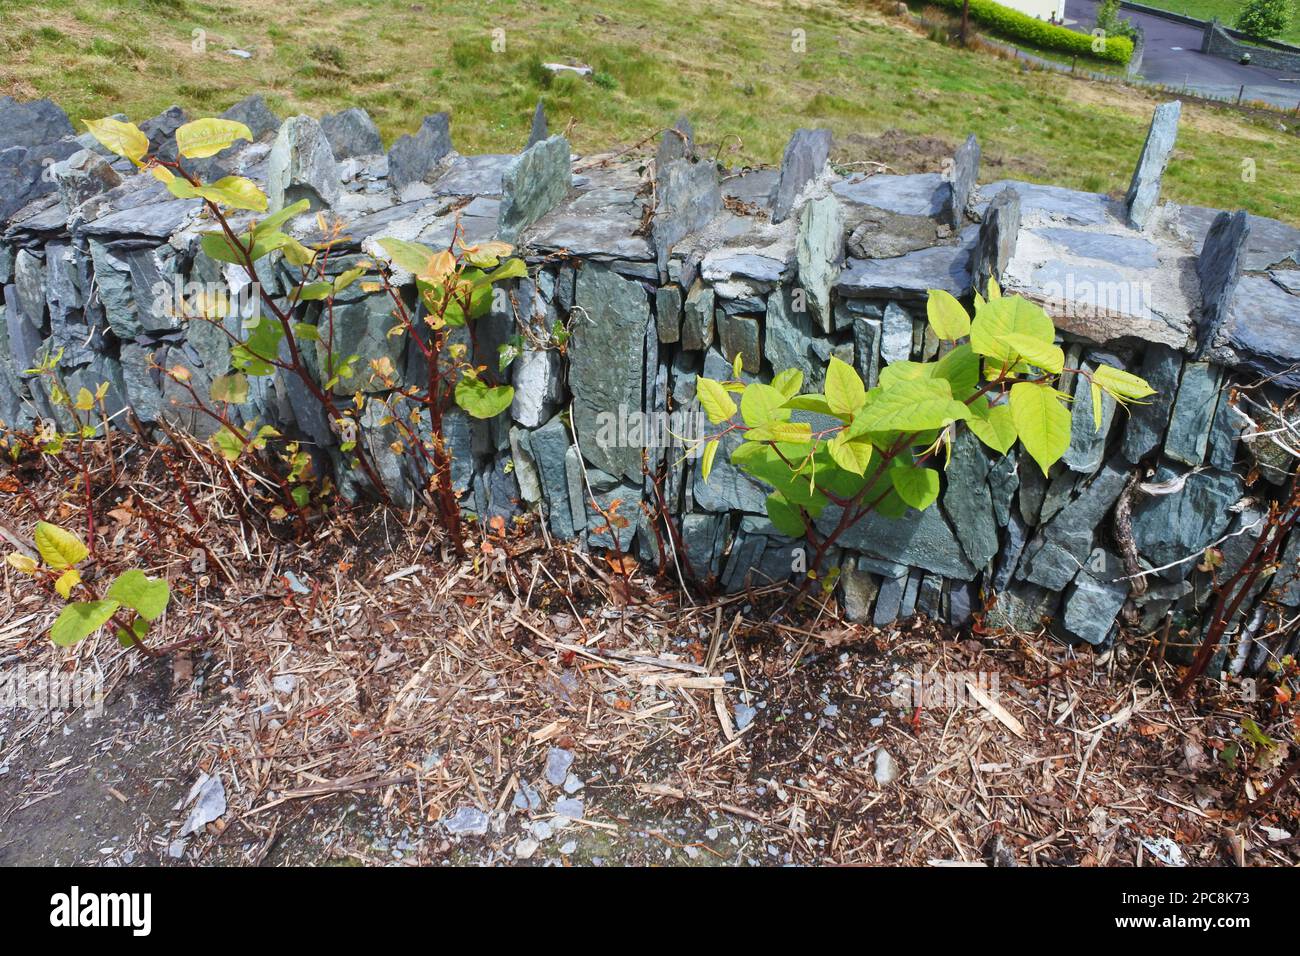 Young Japanese Knotweed shoots emerging through a dry stone wall, Ireland - John Gollop Stock Photo